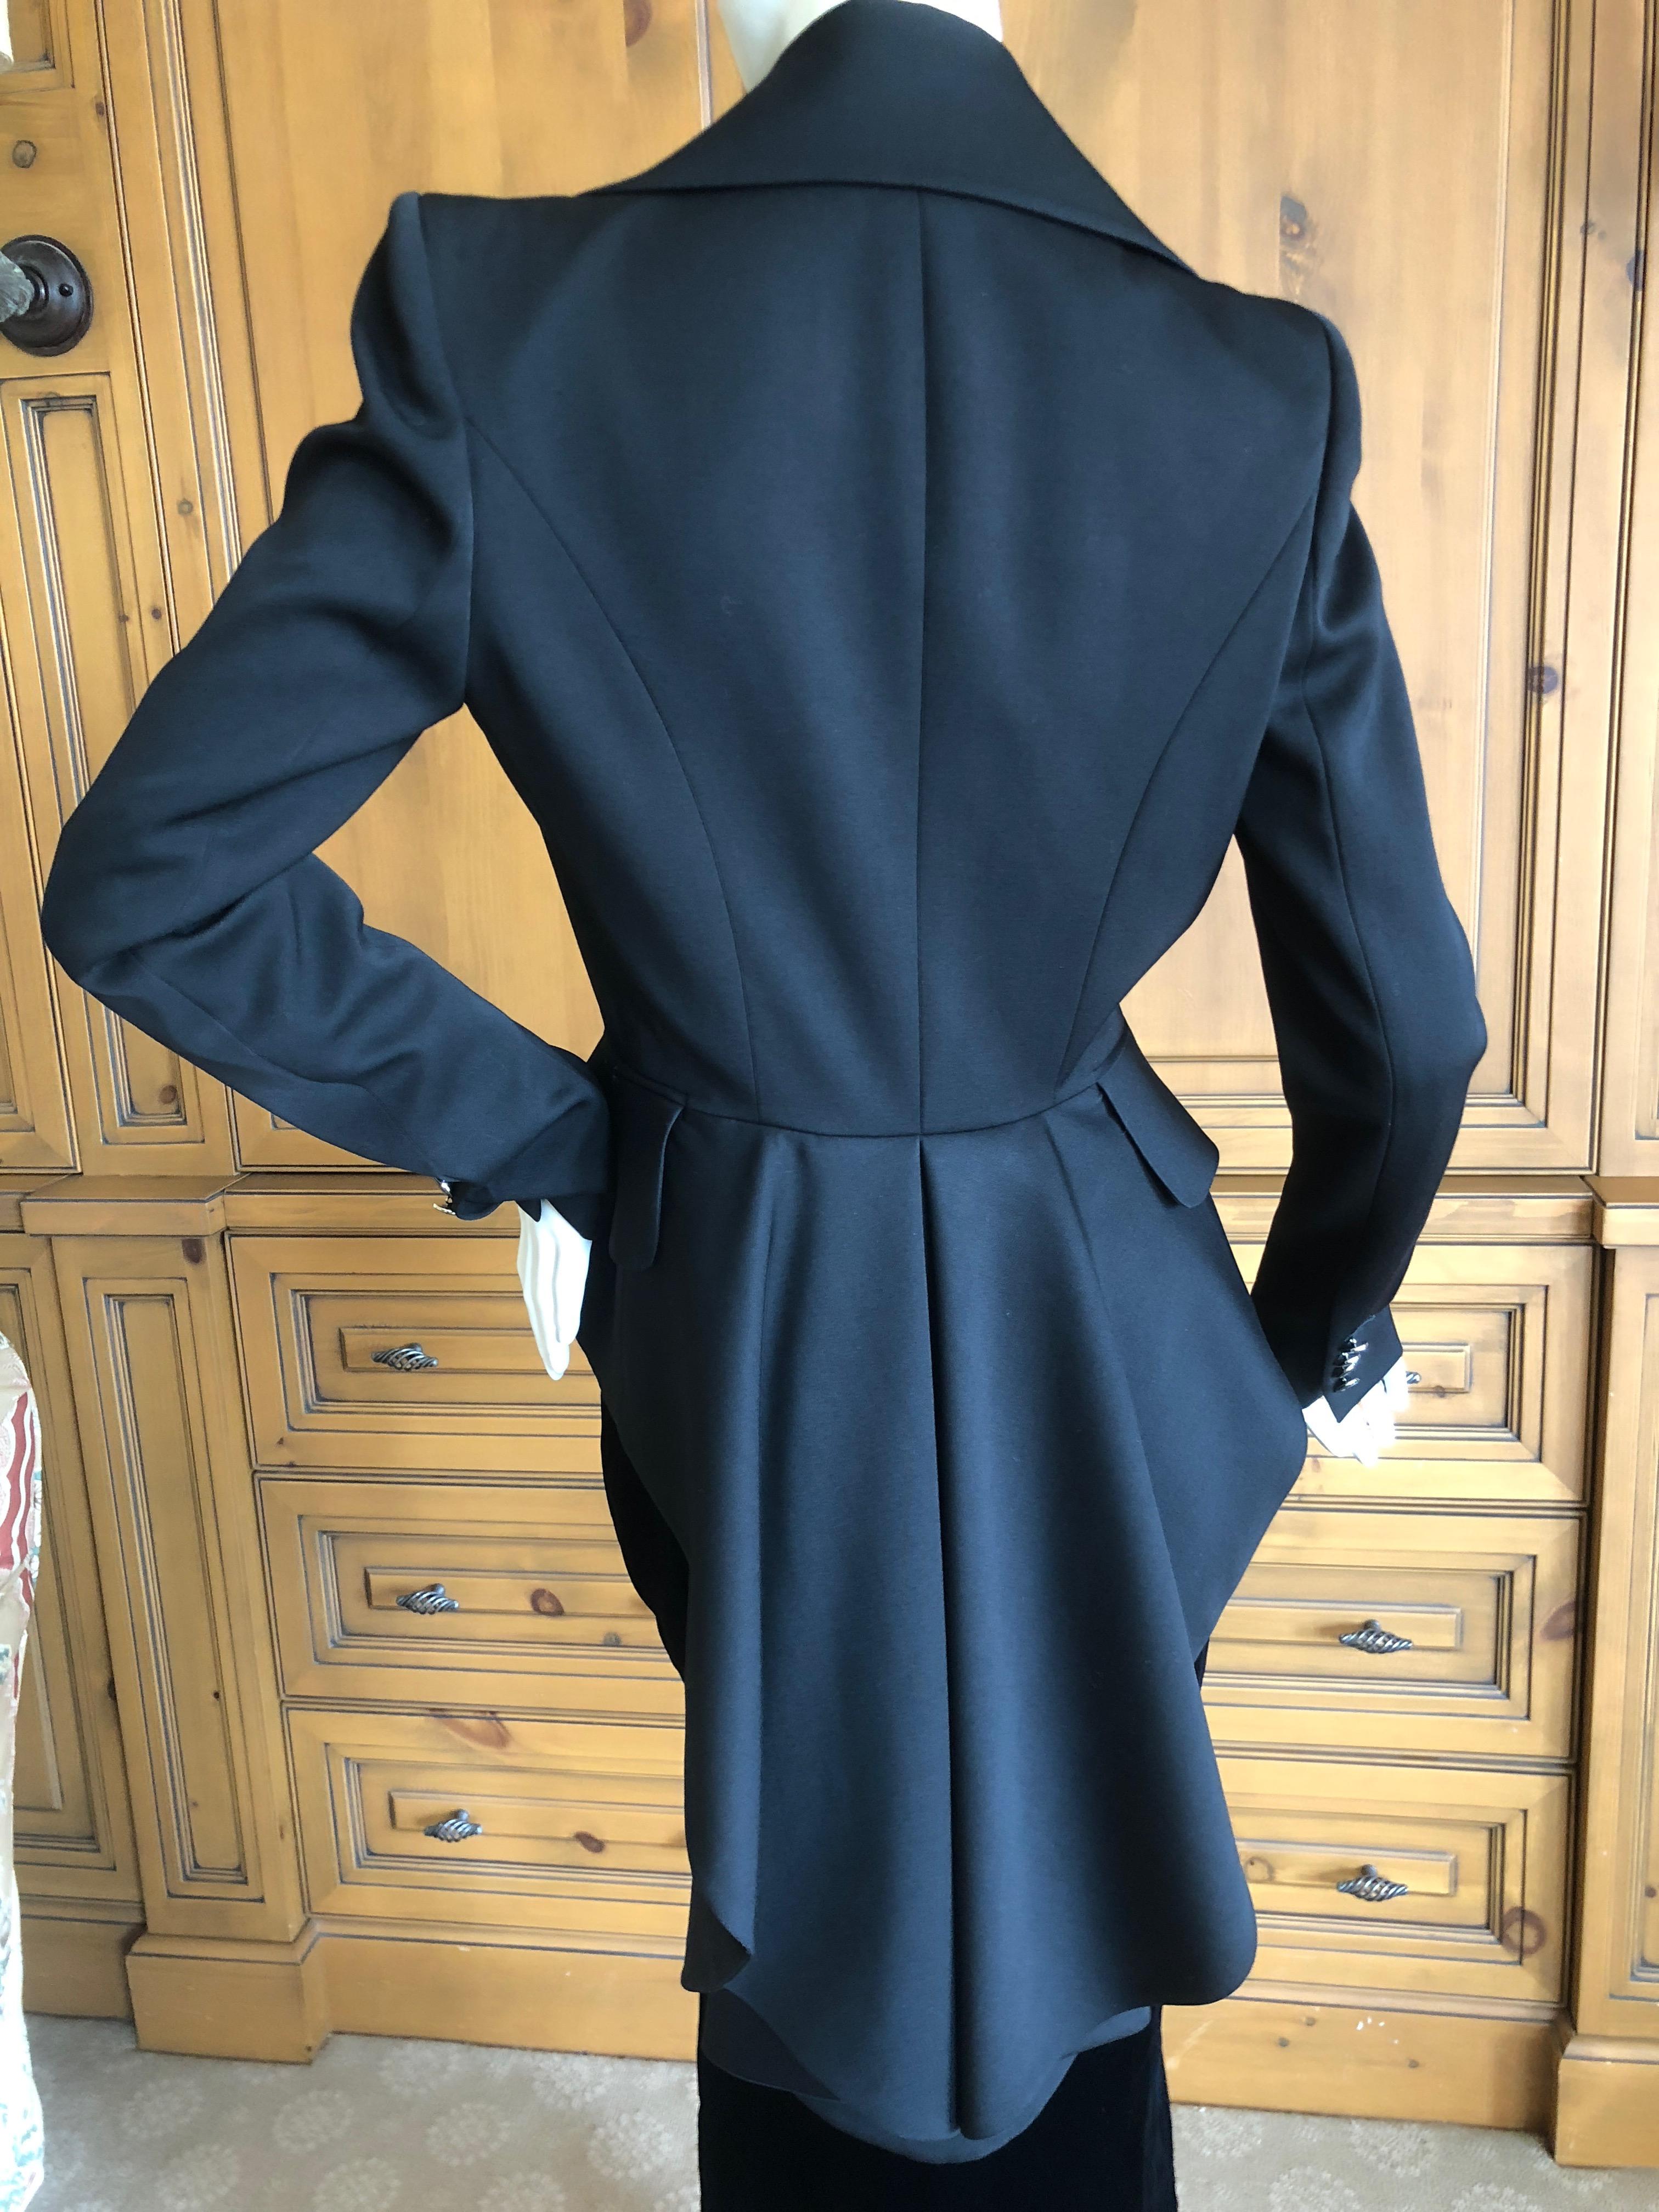 Alexander McQueen Black Tailored Tailcoat with Crystal Embellished Floral Lapels In Excellent Condition For Sale In Cloverdale, CA